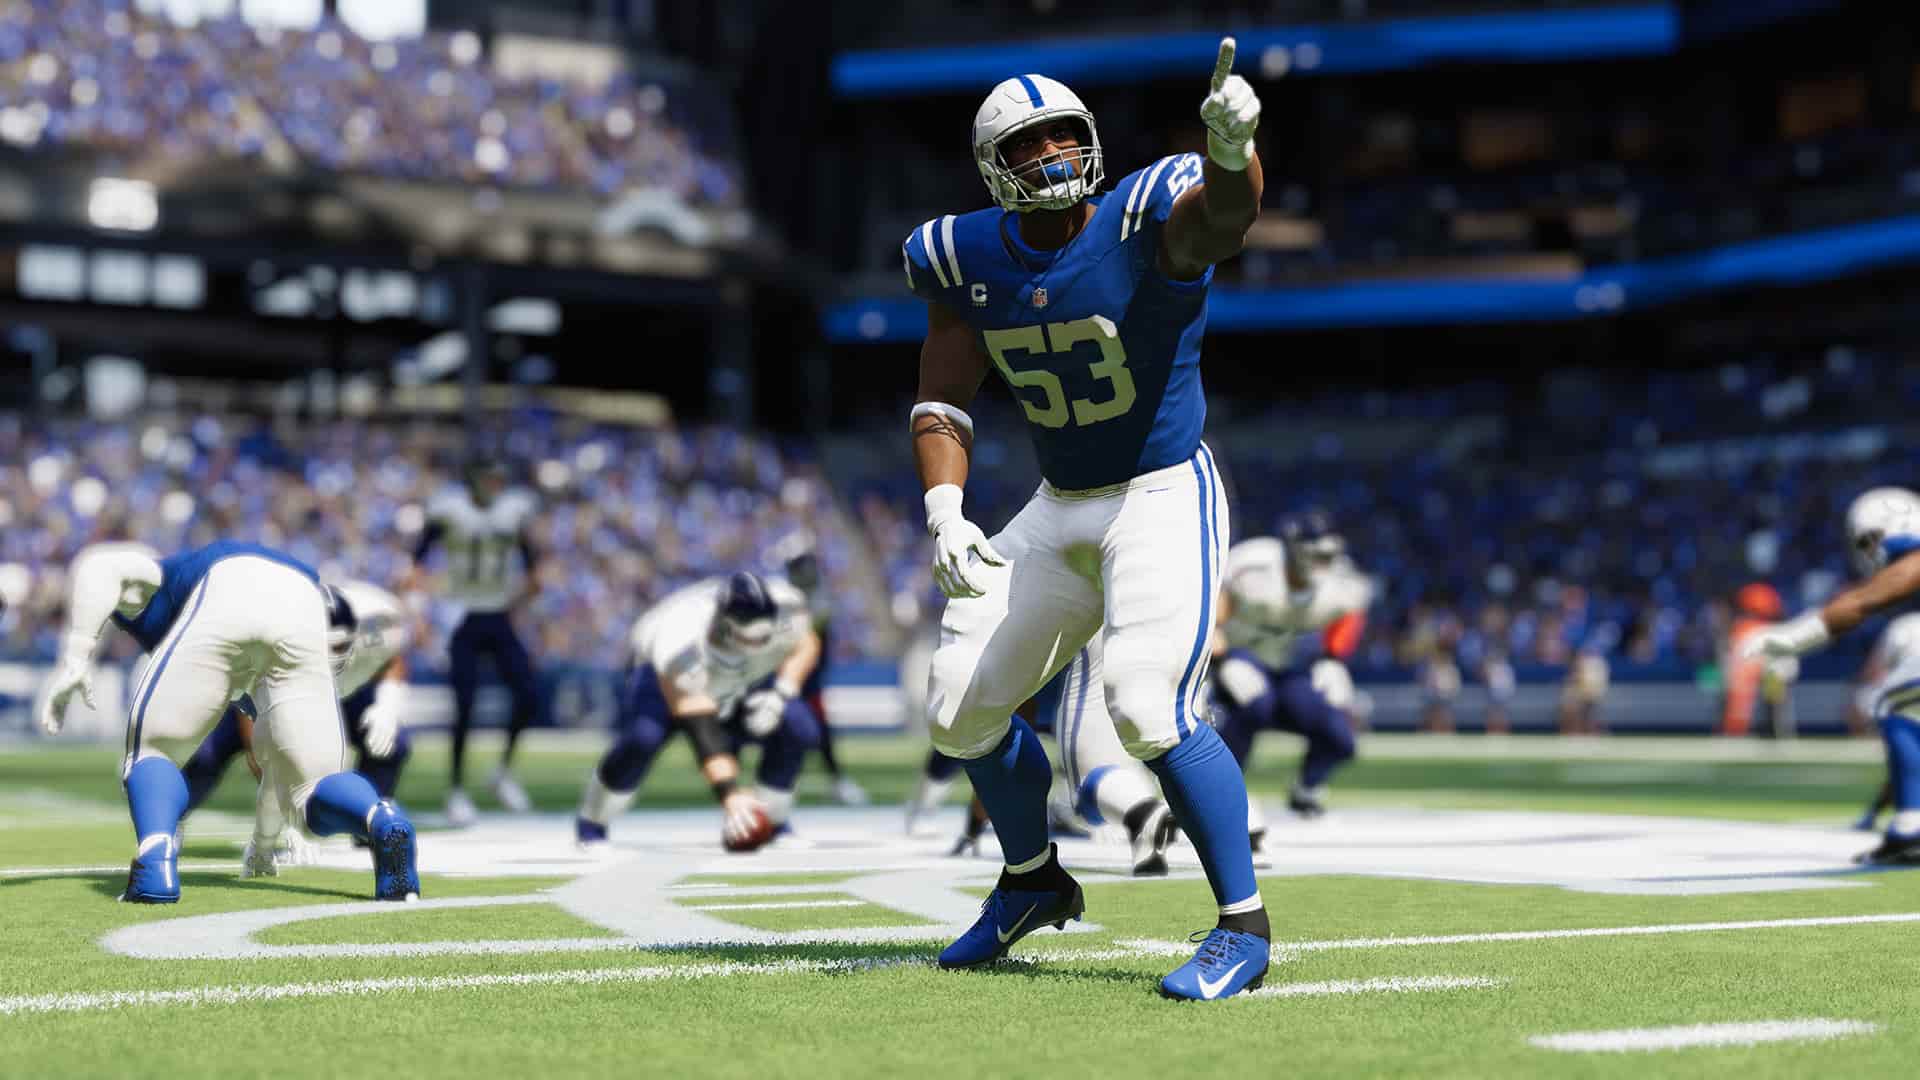 madden-nfl-23-controller-not-working-properly-for-some-players-is-there-any-fix-yet-min